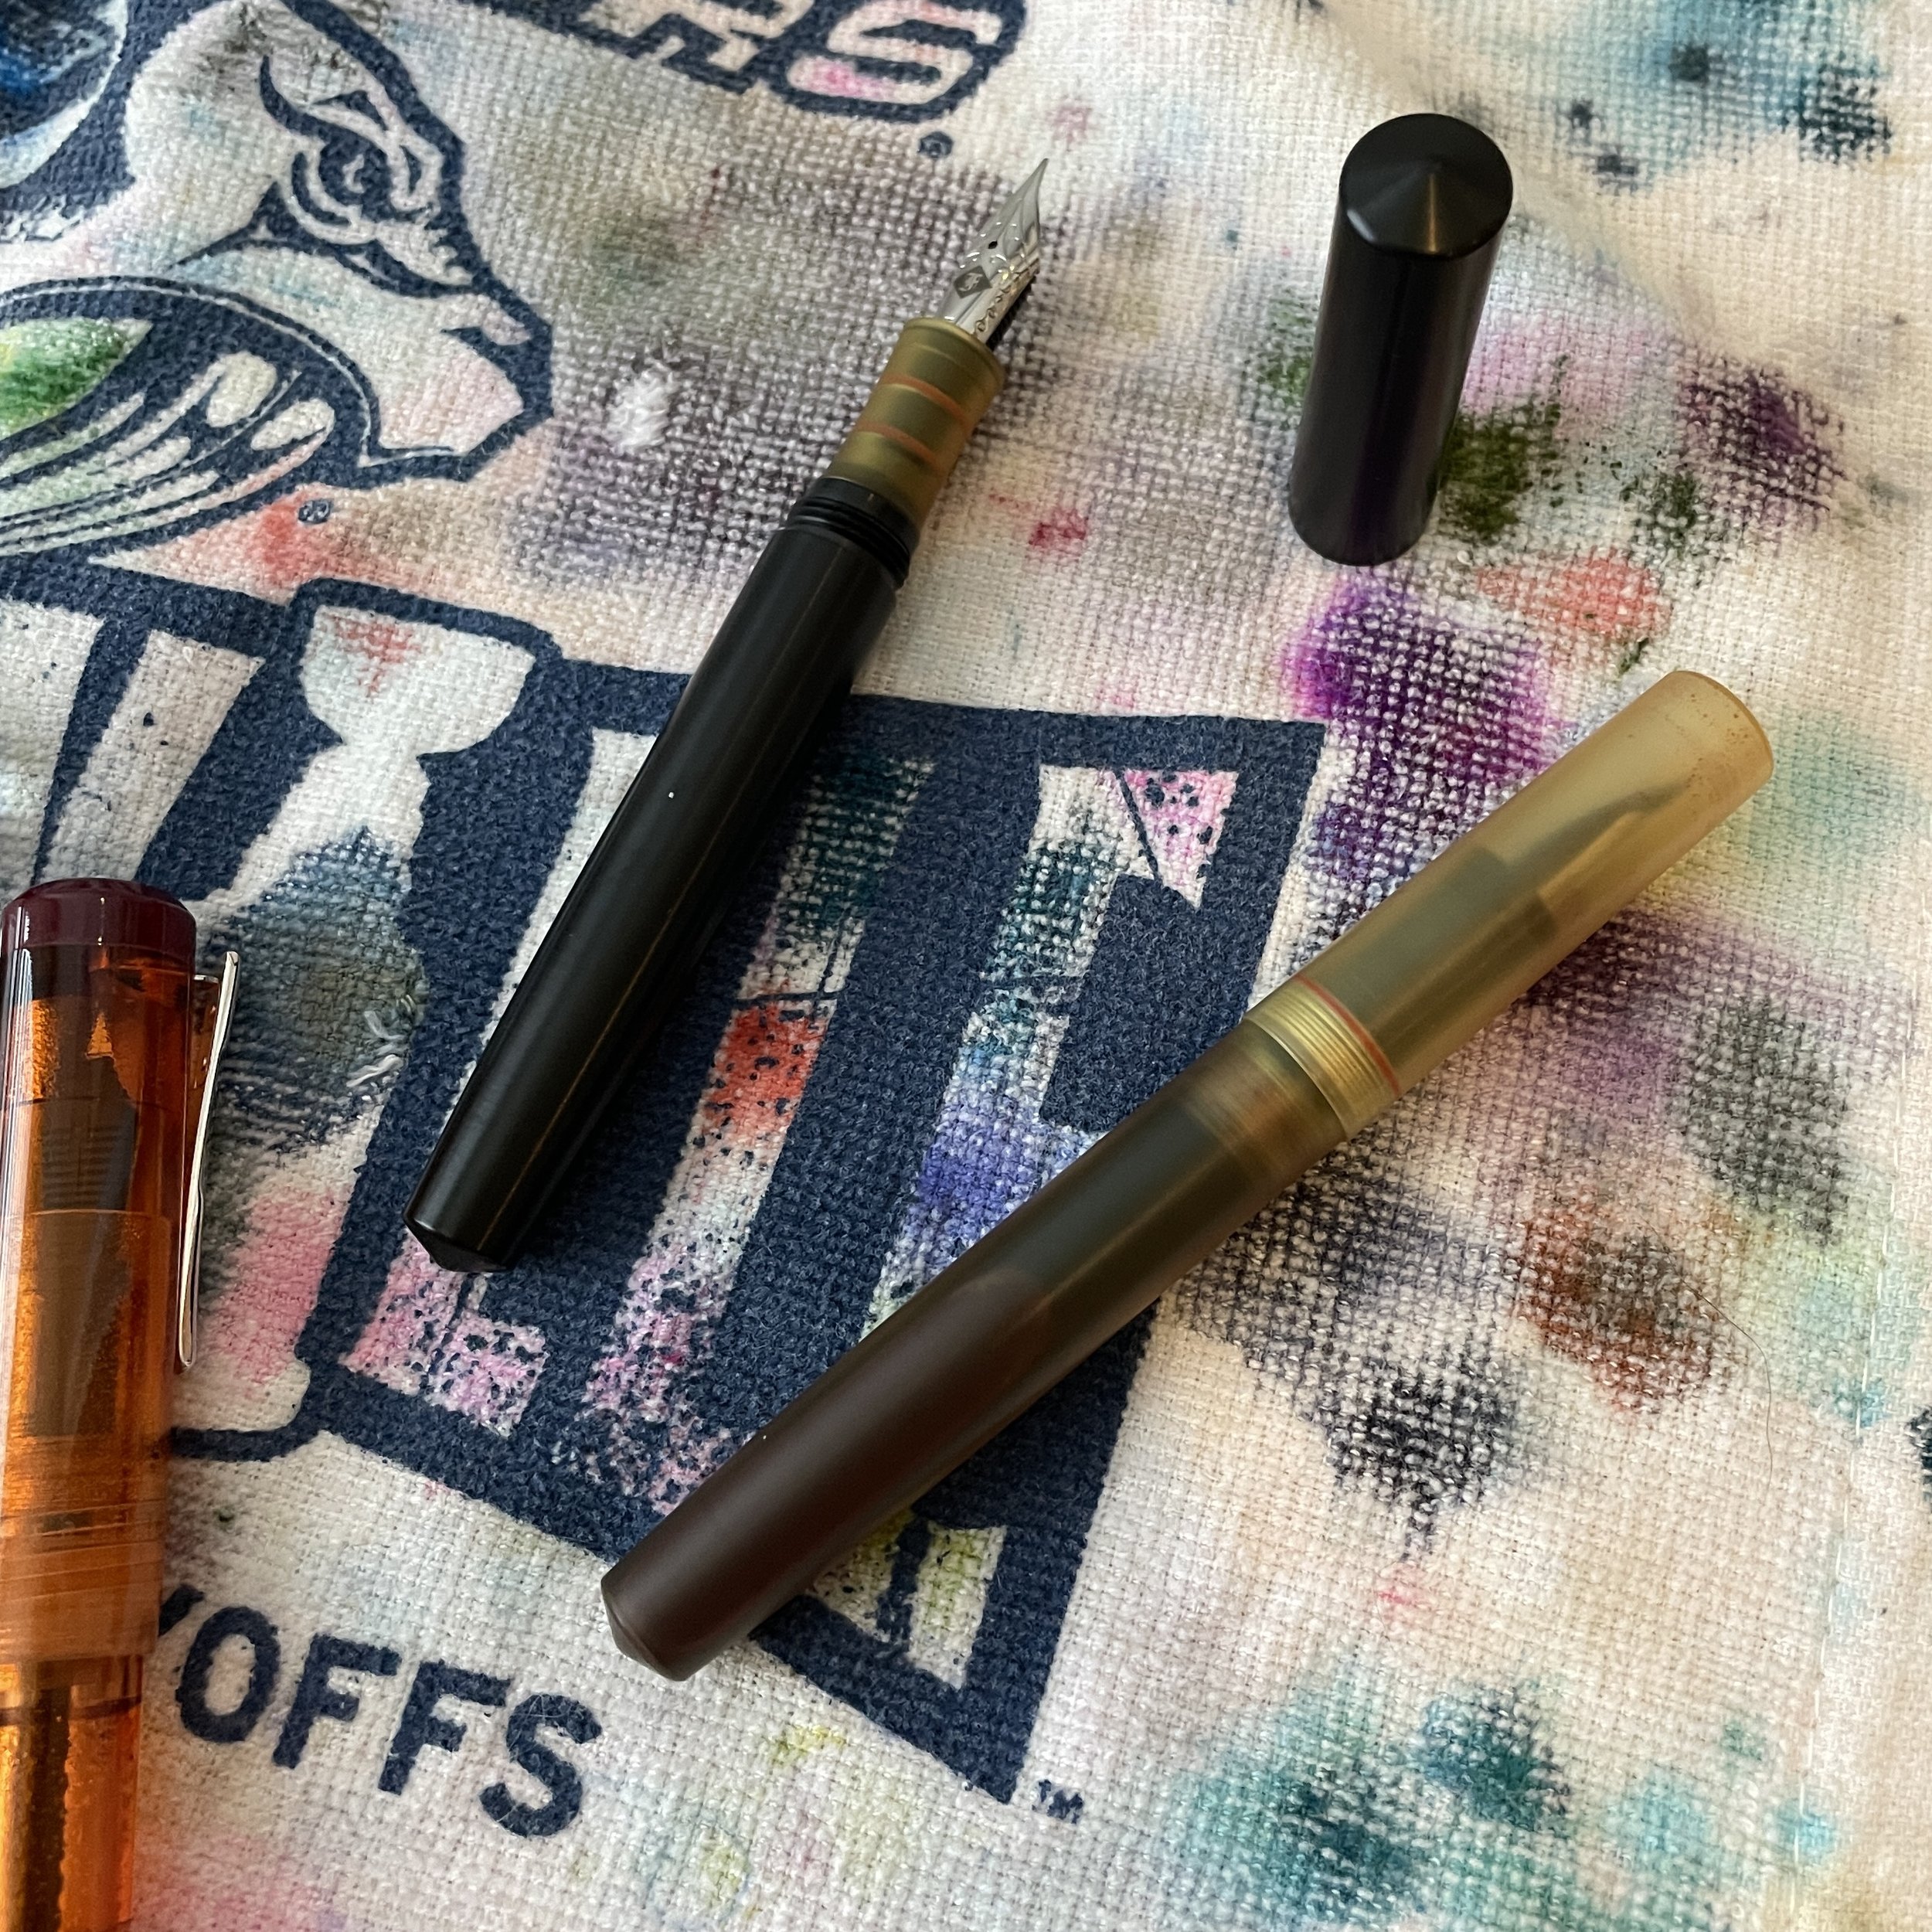 By All Means Necessary: Note Book of Ordinary Things 11: Fountain Pens and  Fingers Stained by Ink